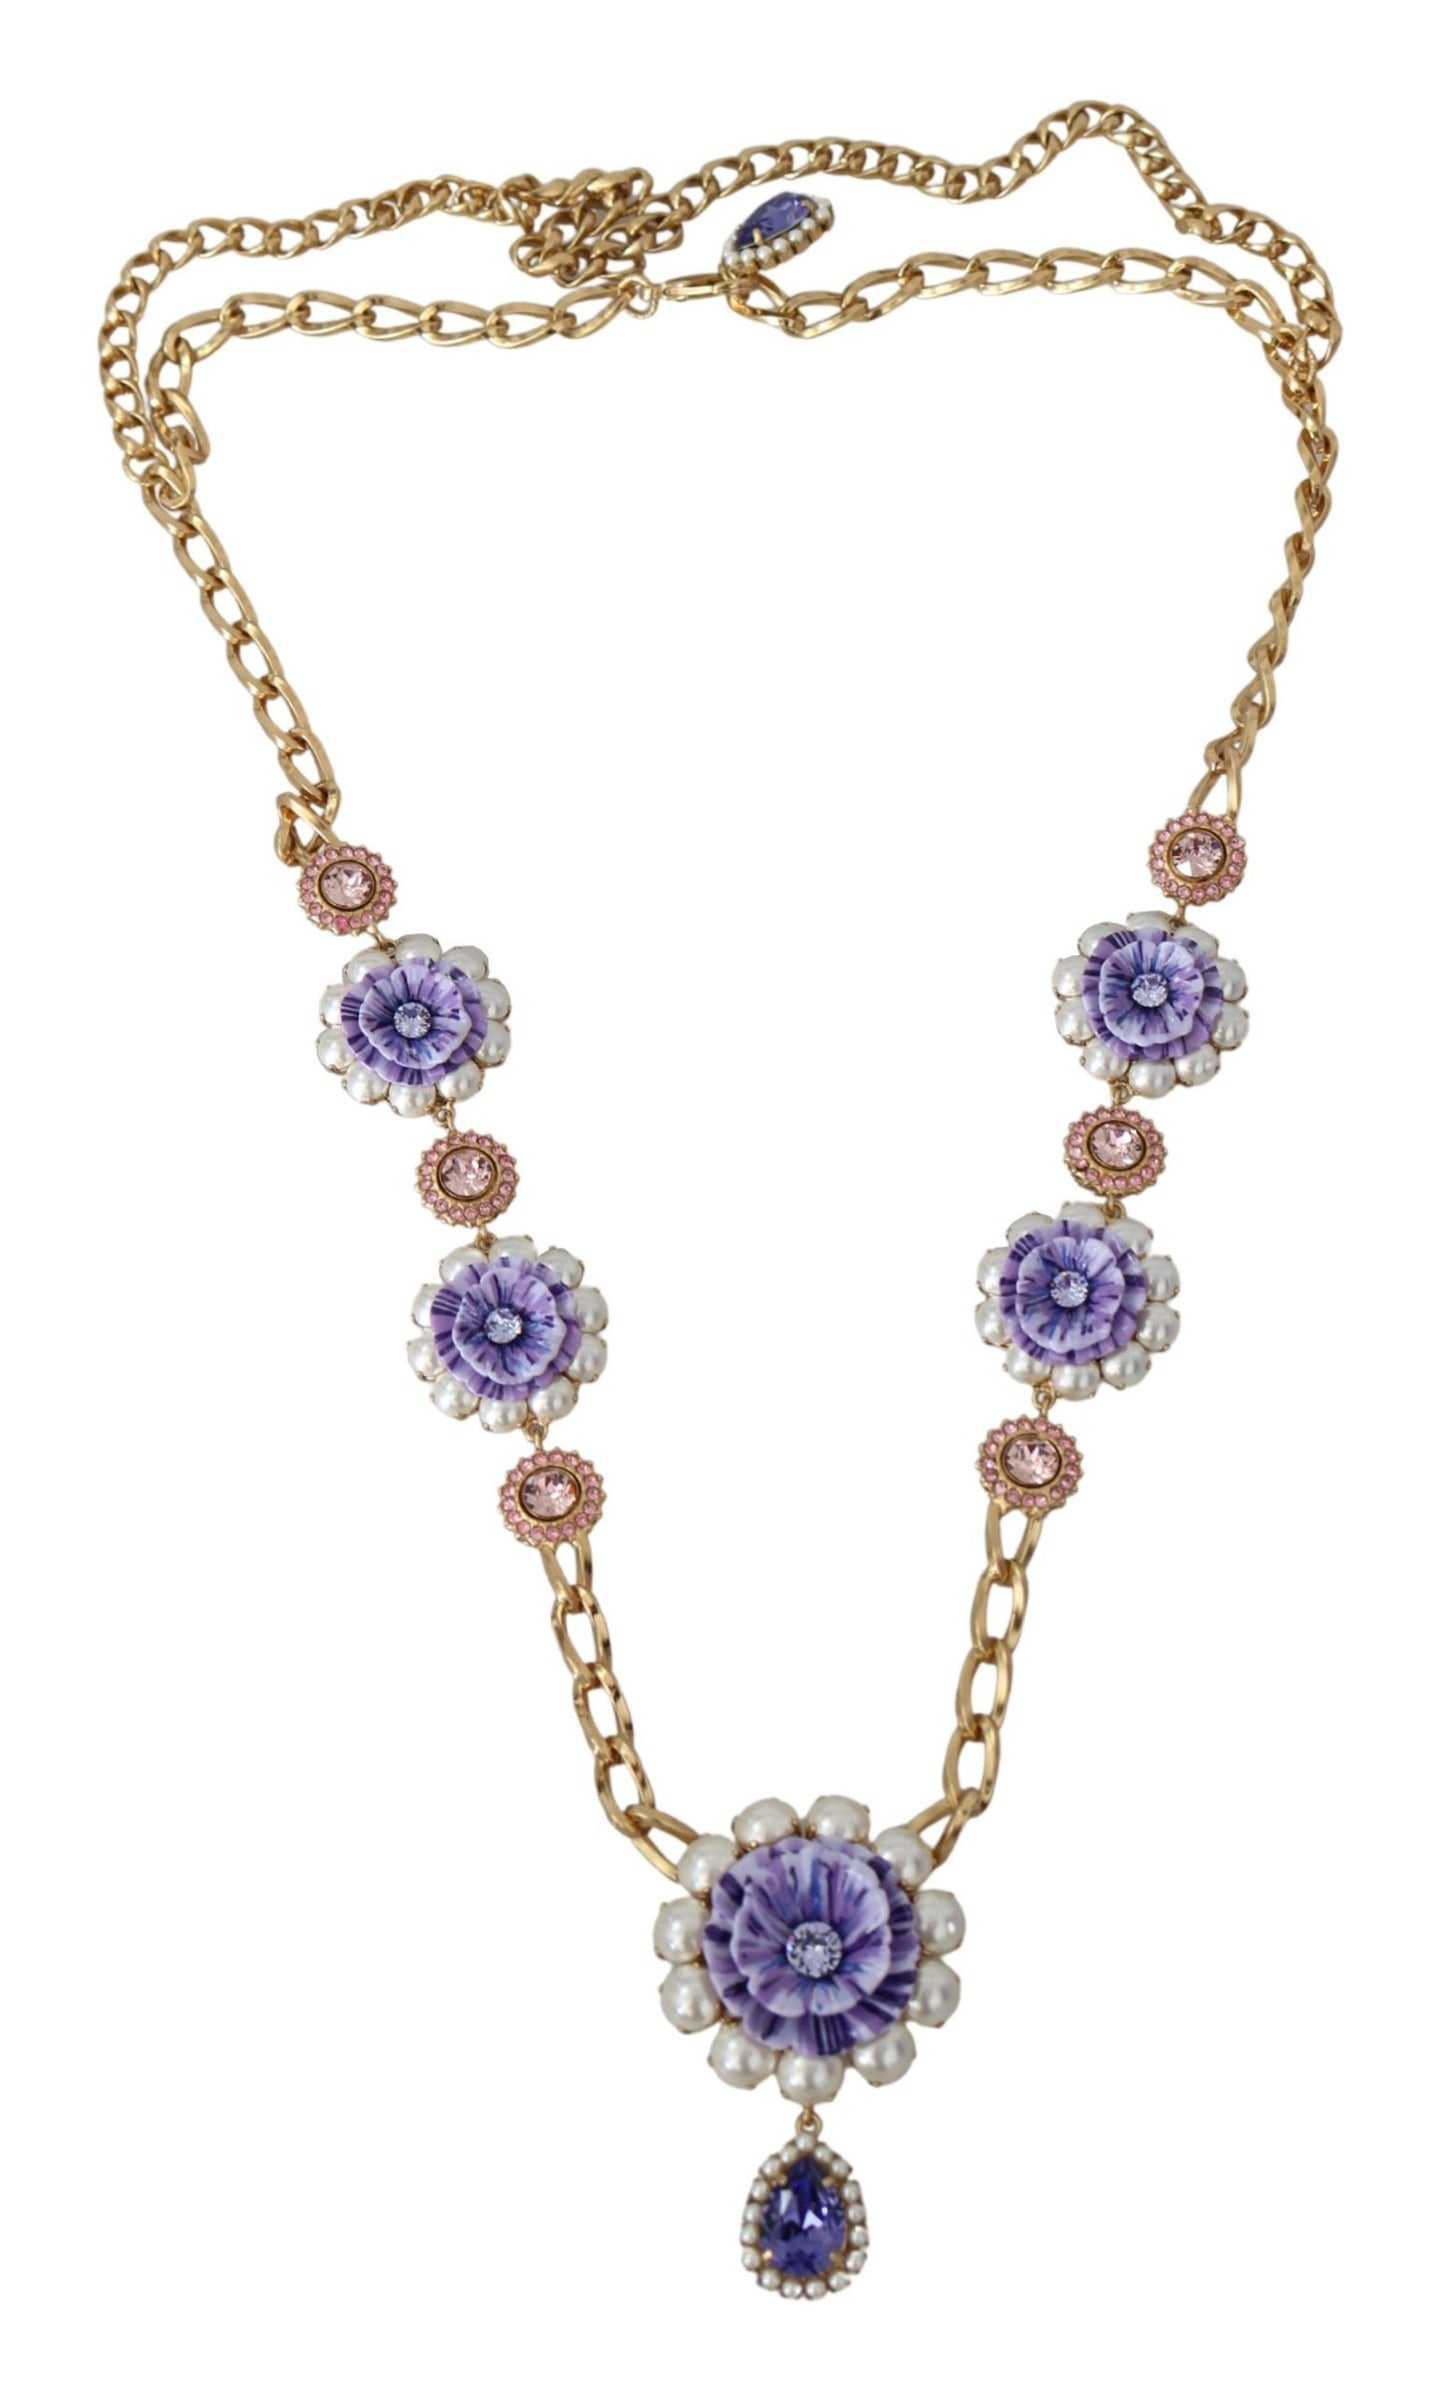 Elegant Gold-Tone Charm Necklace with Floral Motif